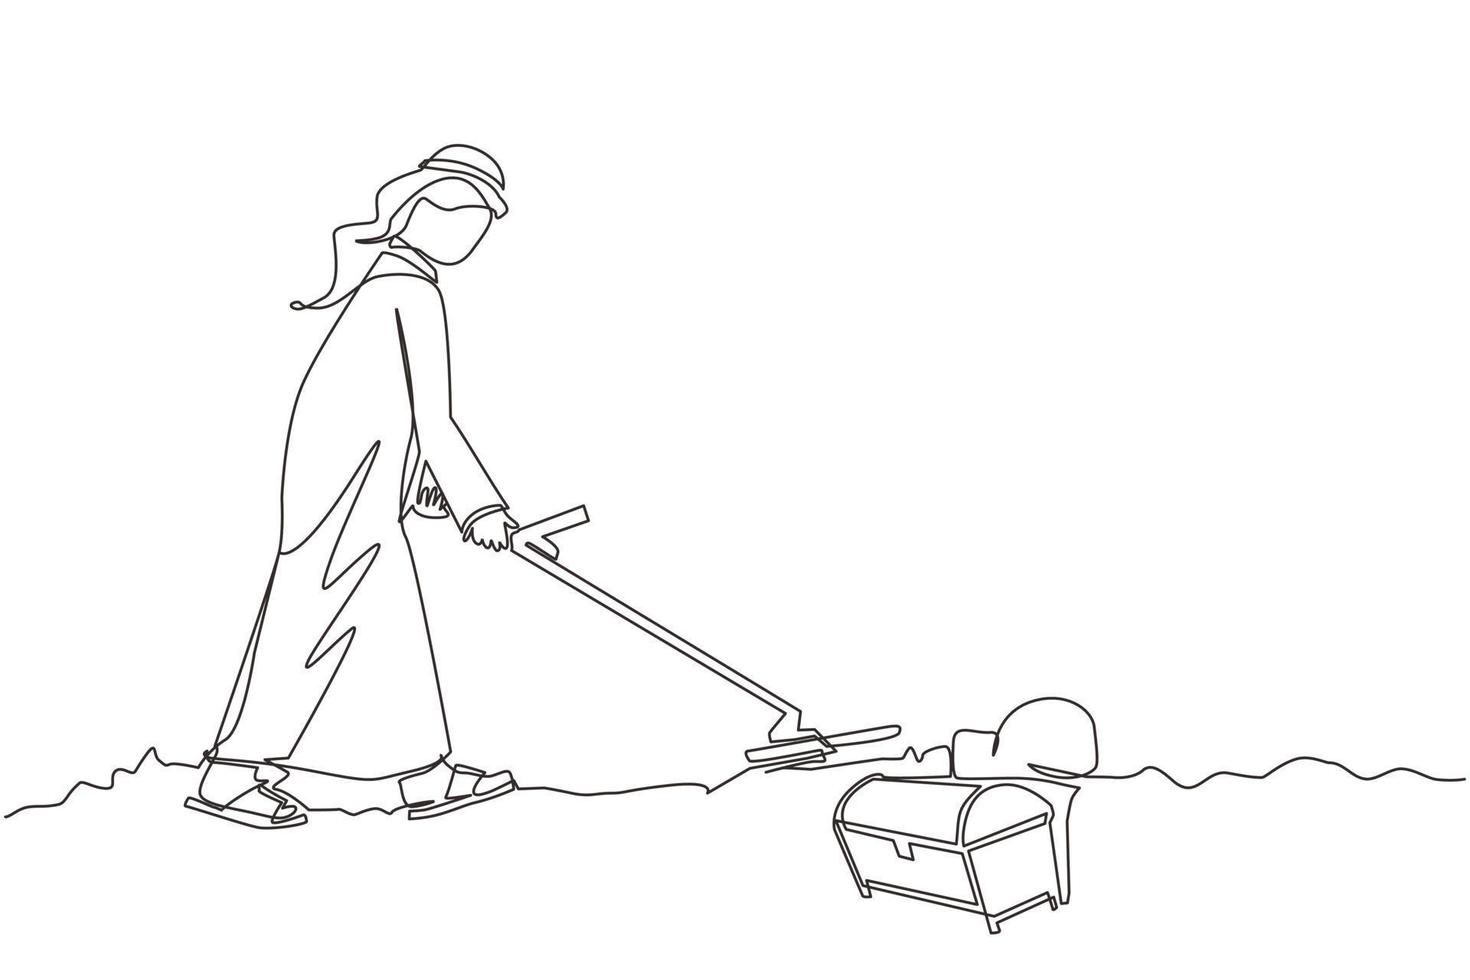 Single one line drawing Arabian businessman with metal detector looking for treasure chest. Man treasure seeker with metal detector finding precious jewel. Continuous line draw design graphic vector